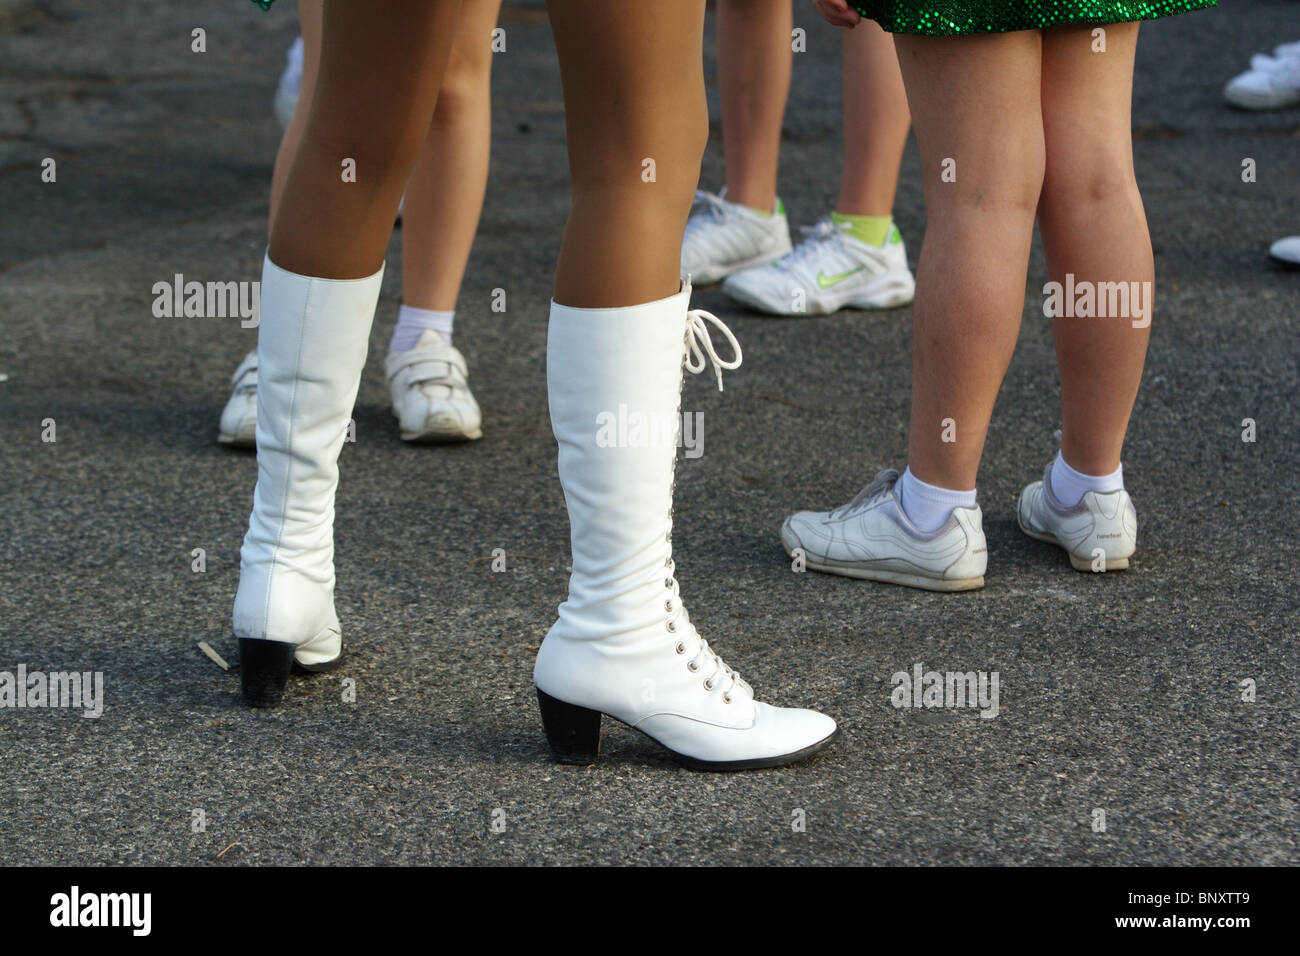 Band Majorette With Massive Thighs And Legs Dances Using Worn Stock Photo -  Download Image Now - iStock